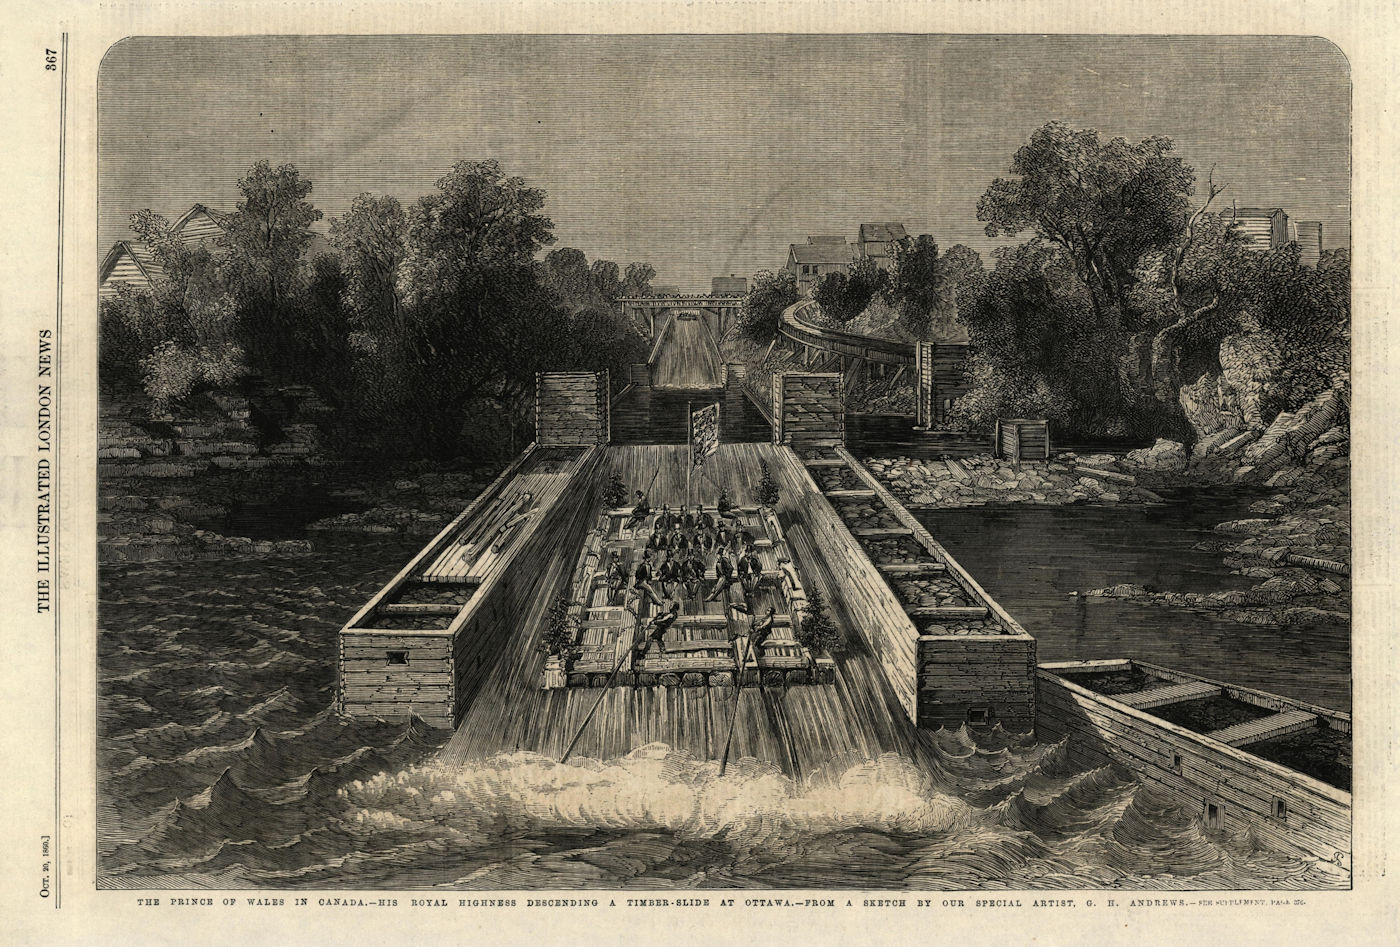 Associate Product Prince of Wales (Edward VII) descending a timber-slide at Ottawa, Canada 1860